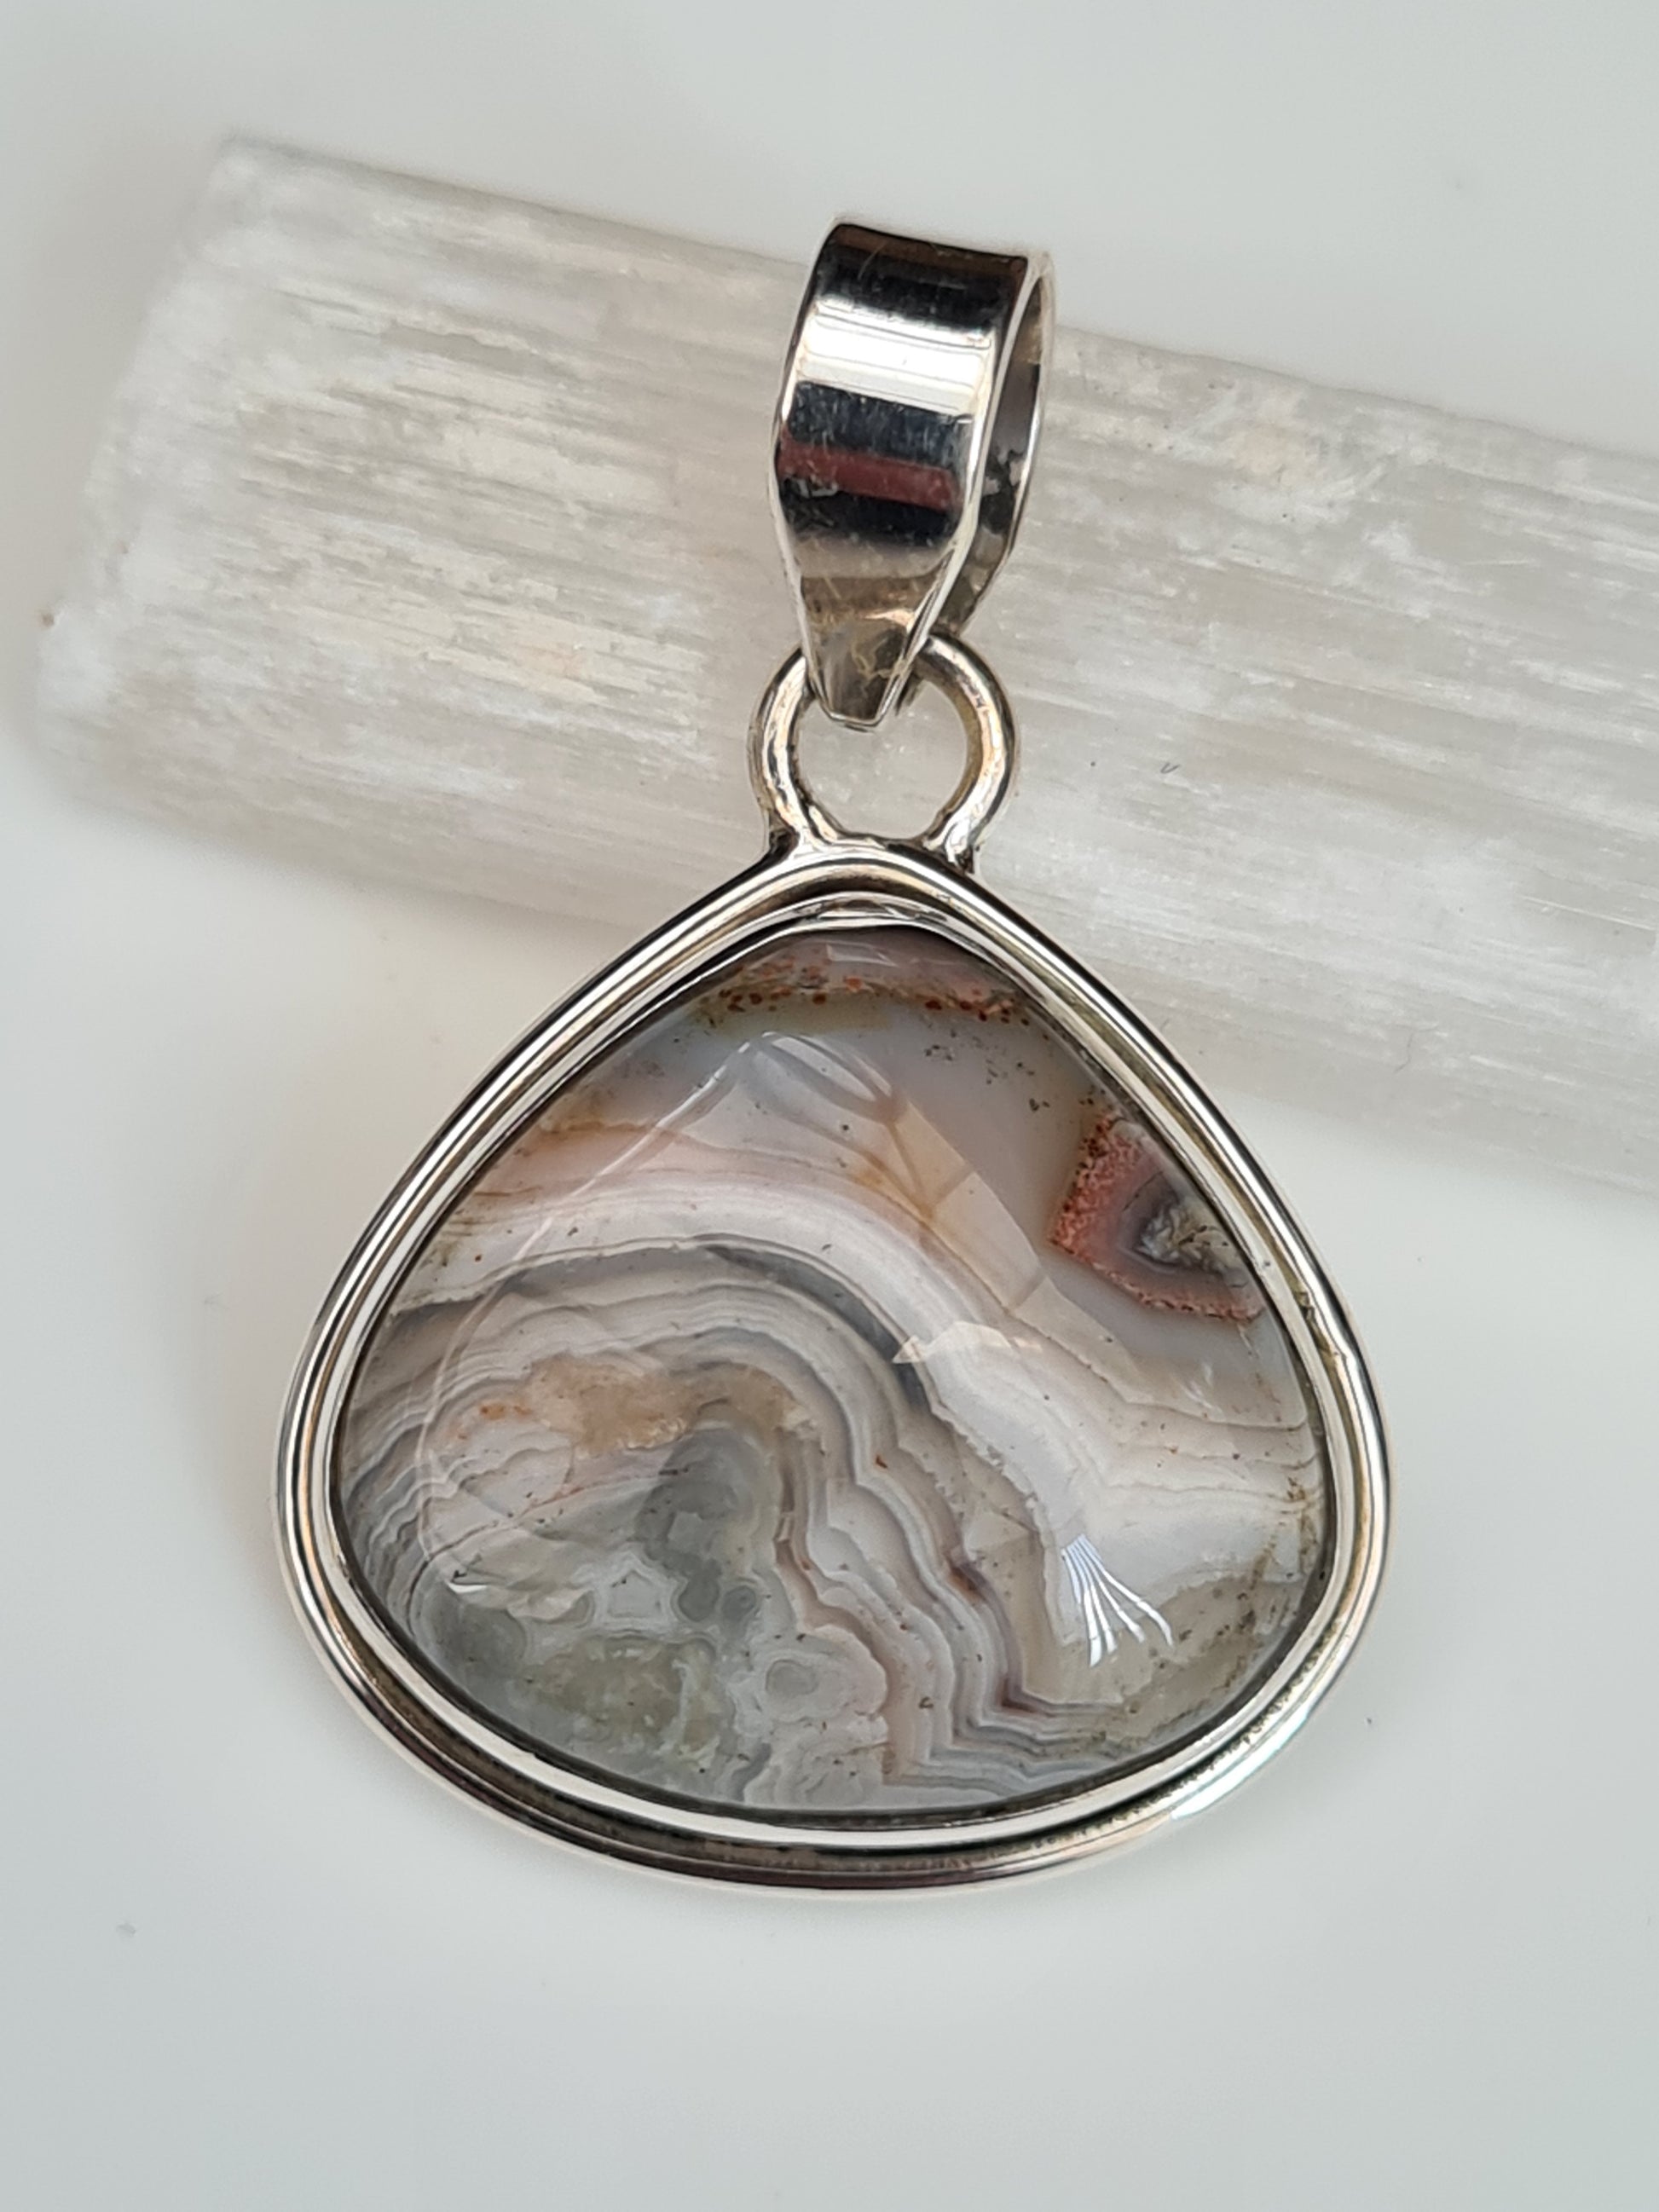 A Pear Shaped Crazy Lace Agate Cabochon Set Pendant in Sterling Silver. Colours of grey, white and red.
Photographed on a white selenite stick and background.